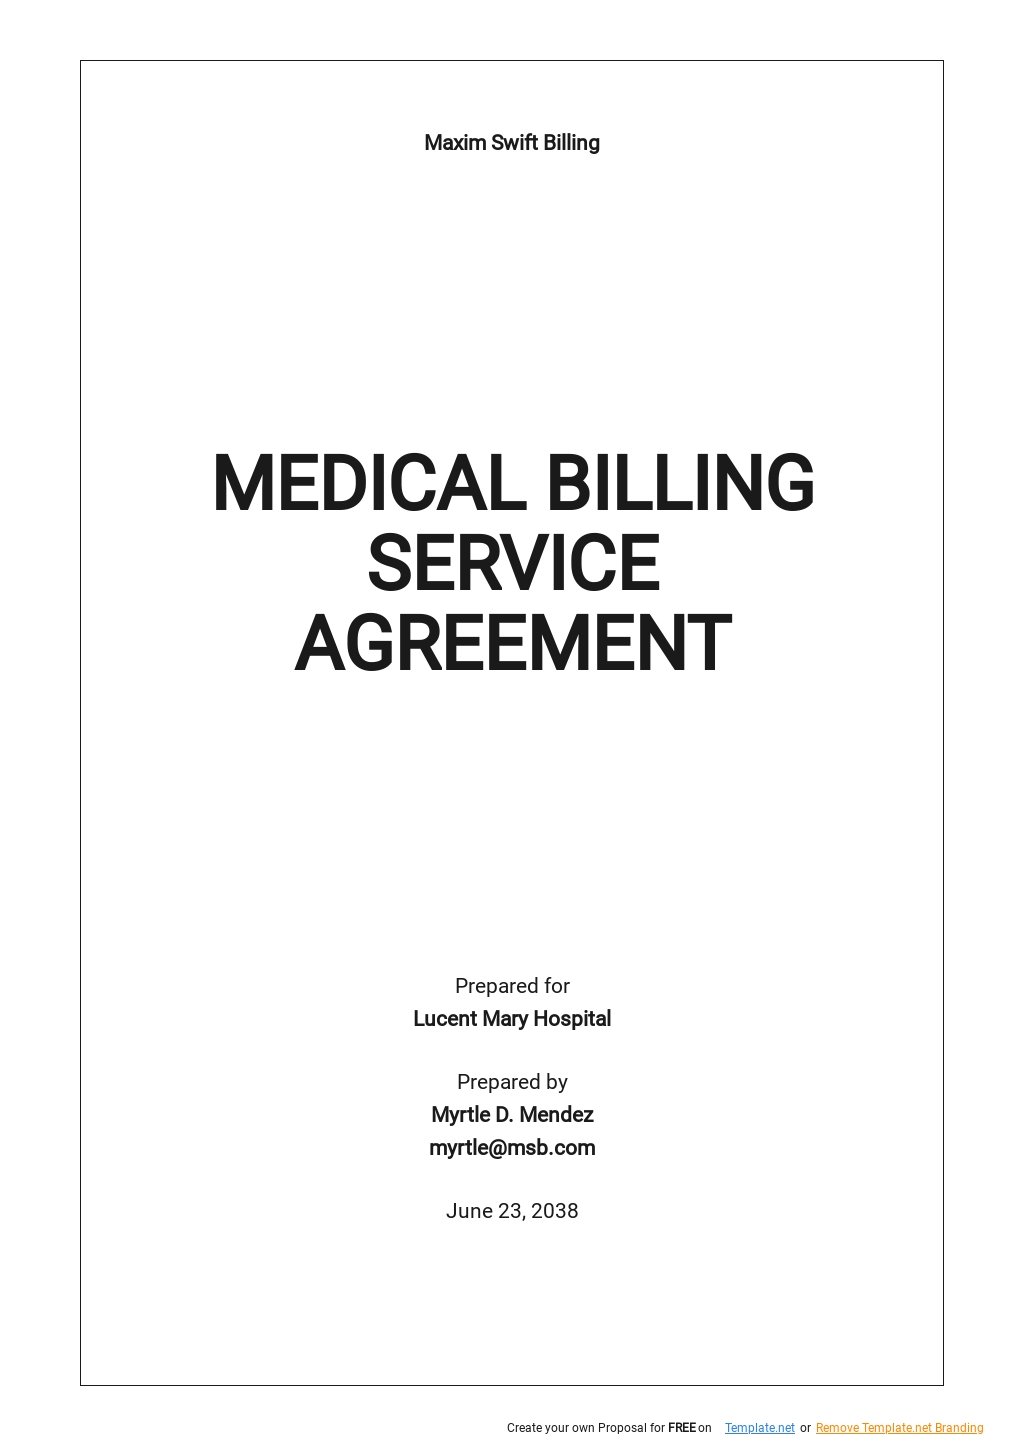 Medical Agreement Templates Documents, Design, Free, Download